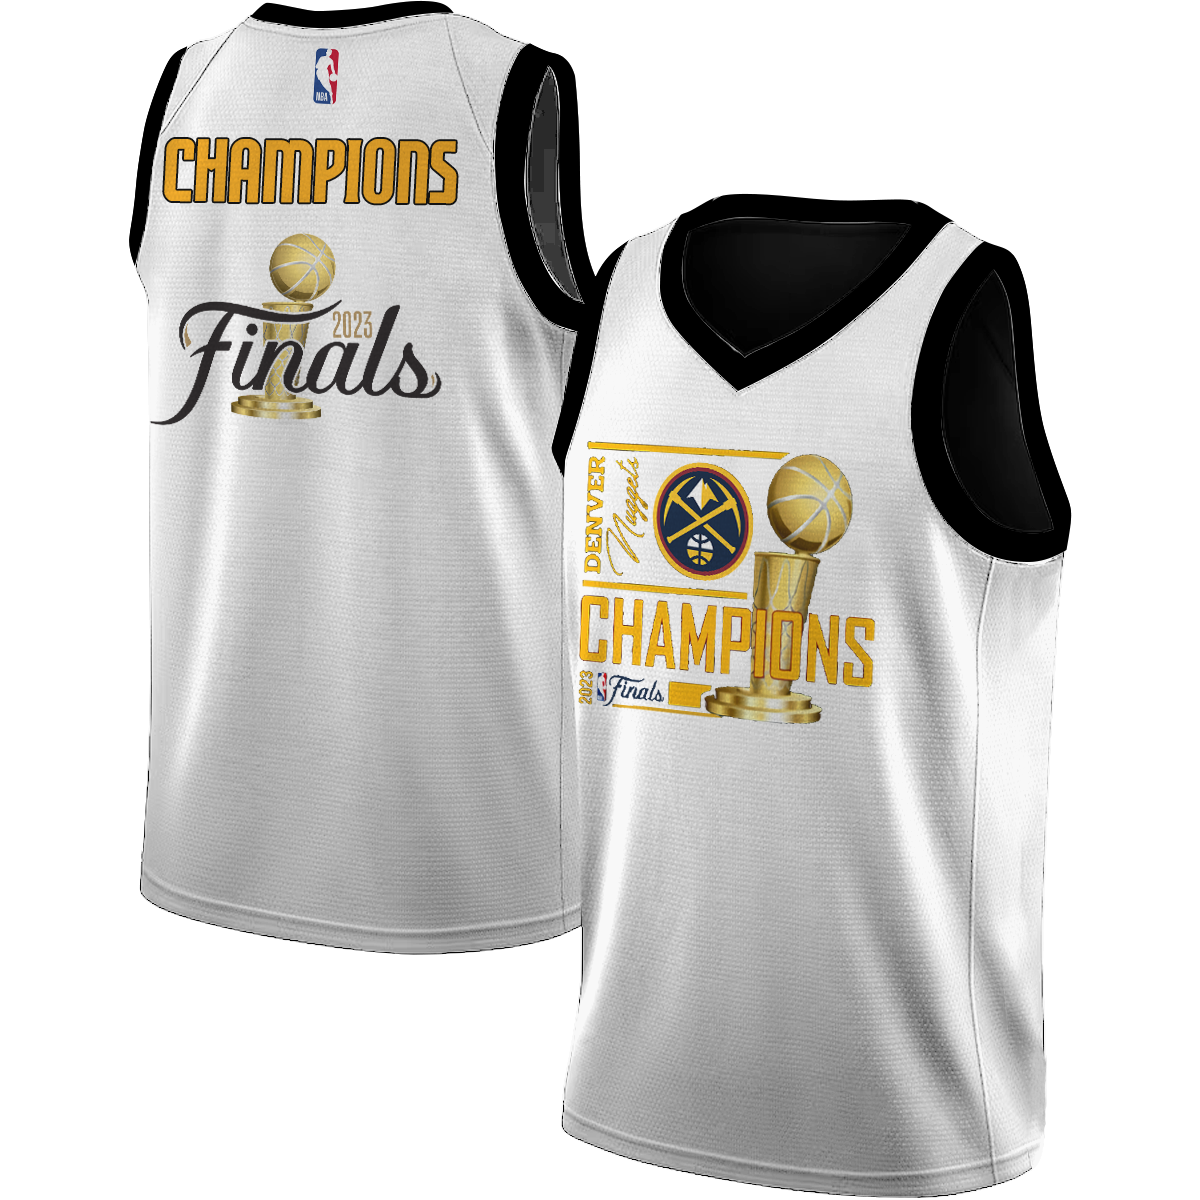 nuggets playoff jersey